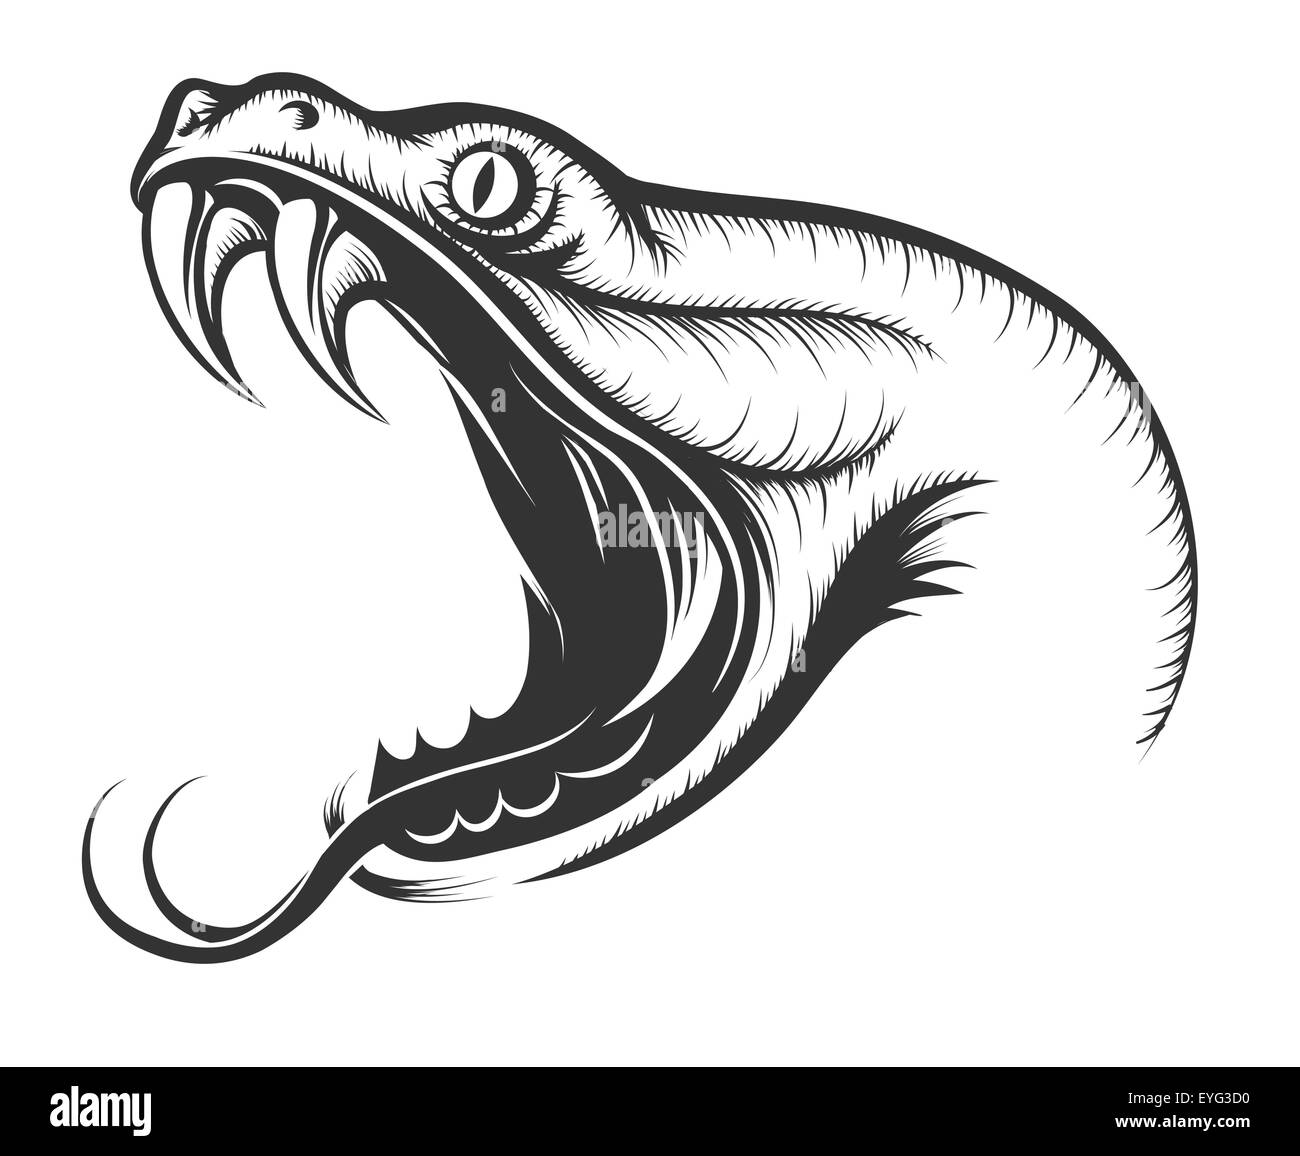 The head of Snake. Engraving style. Isolated on white. Stock Vector